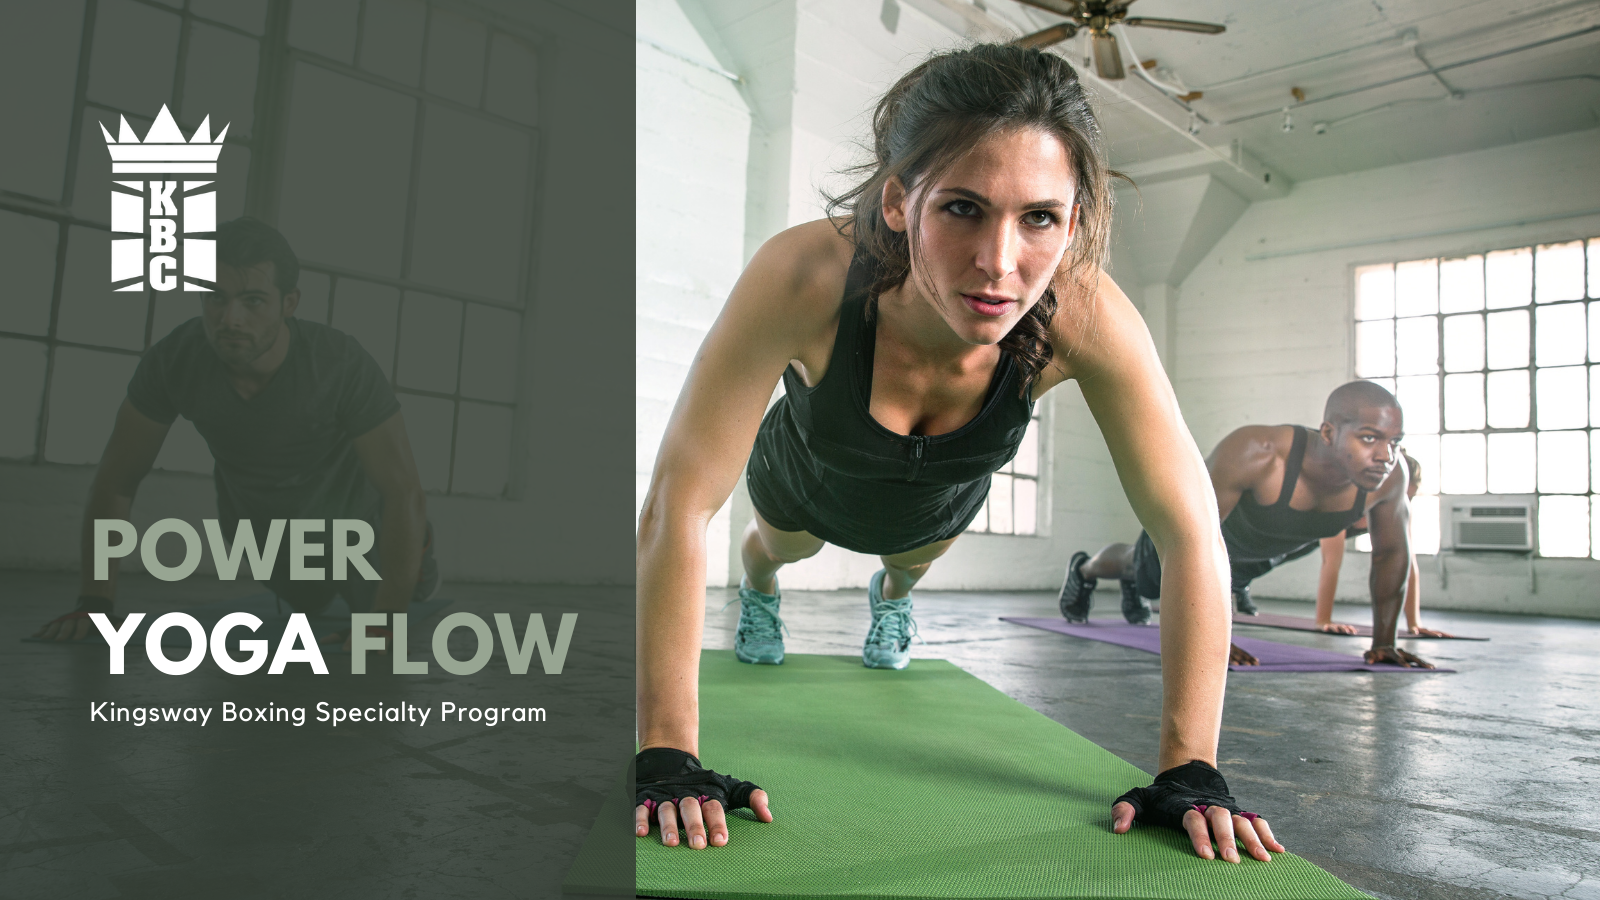 NEW PROGRAM: Power Yoga Flow Every Wednesday At 7:00 Am – KINGSWAY